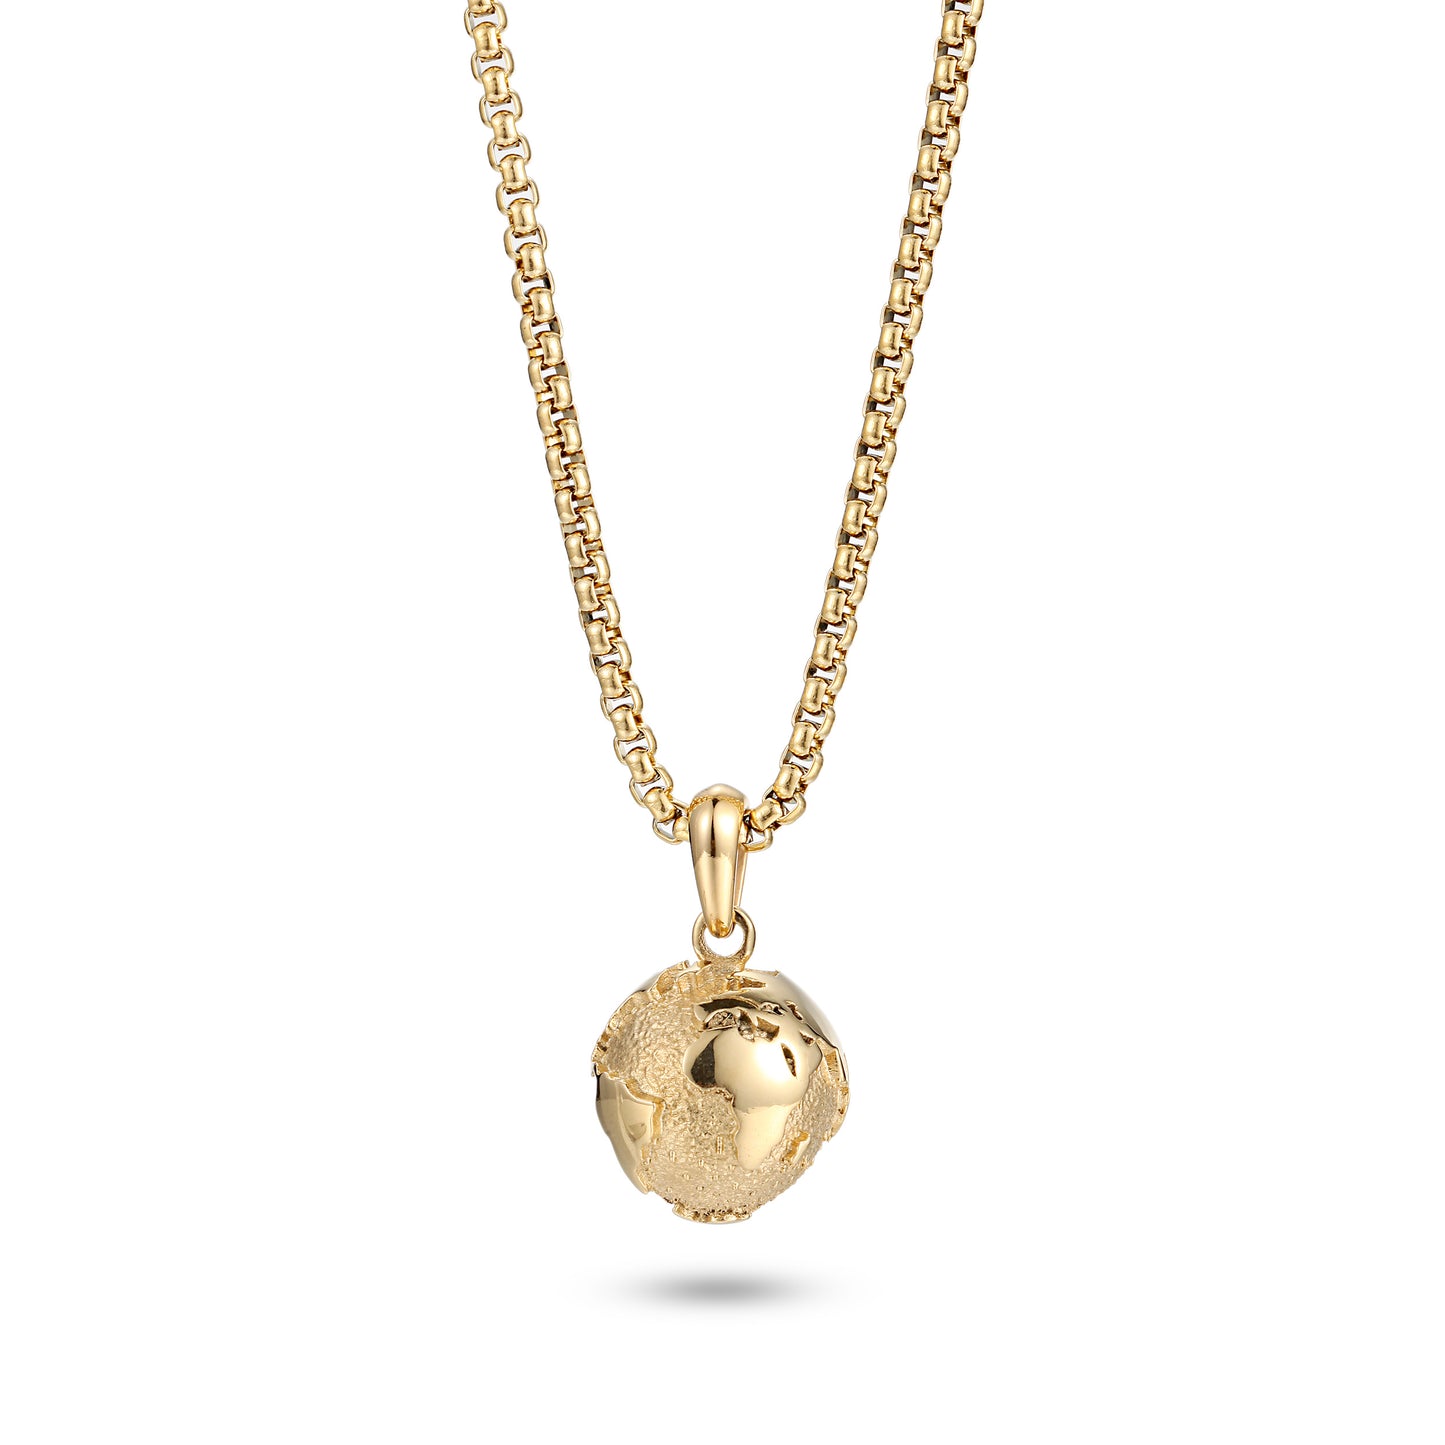 Stainless Steel Globe Earth Pendant Necklace, Gold